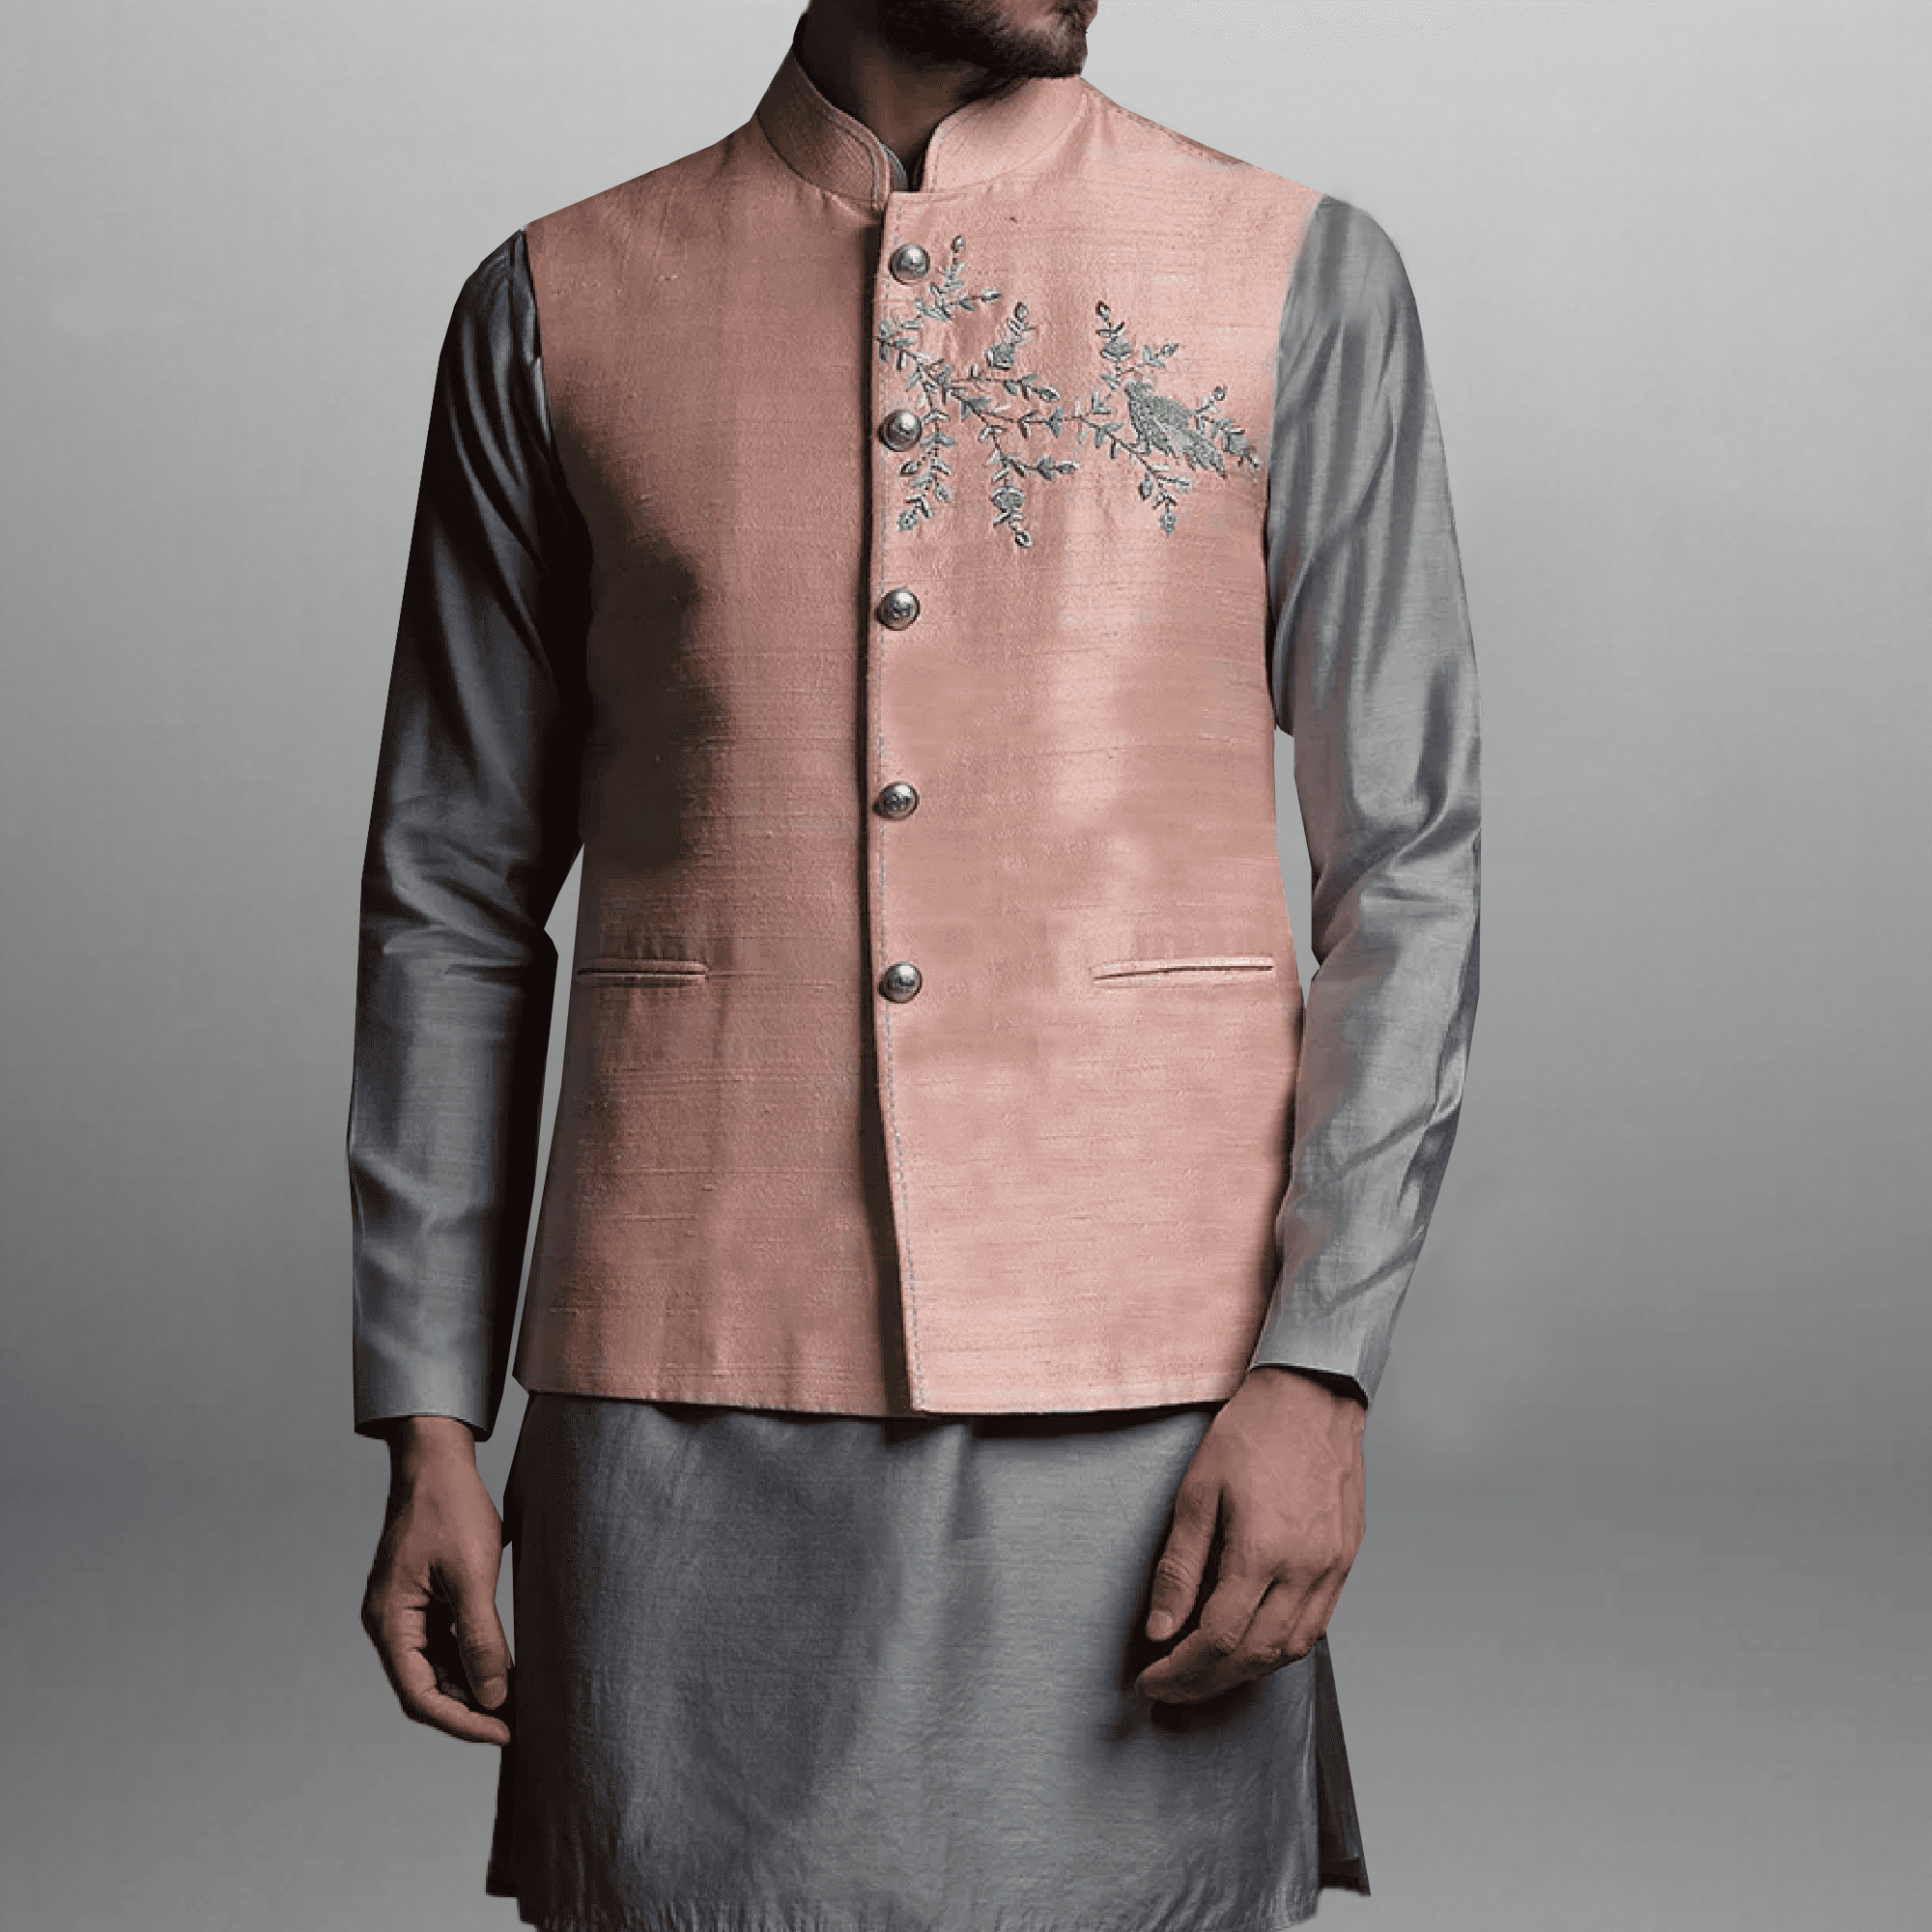 Men's Peach Pink waistcoat with embroidery-RMWC006